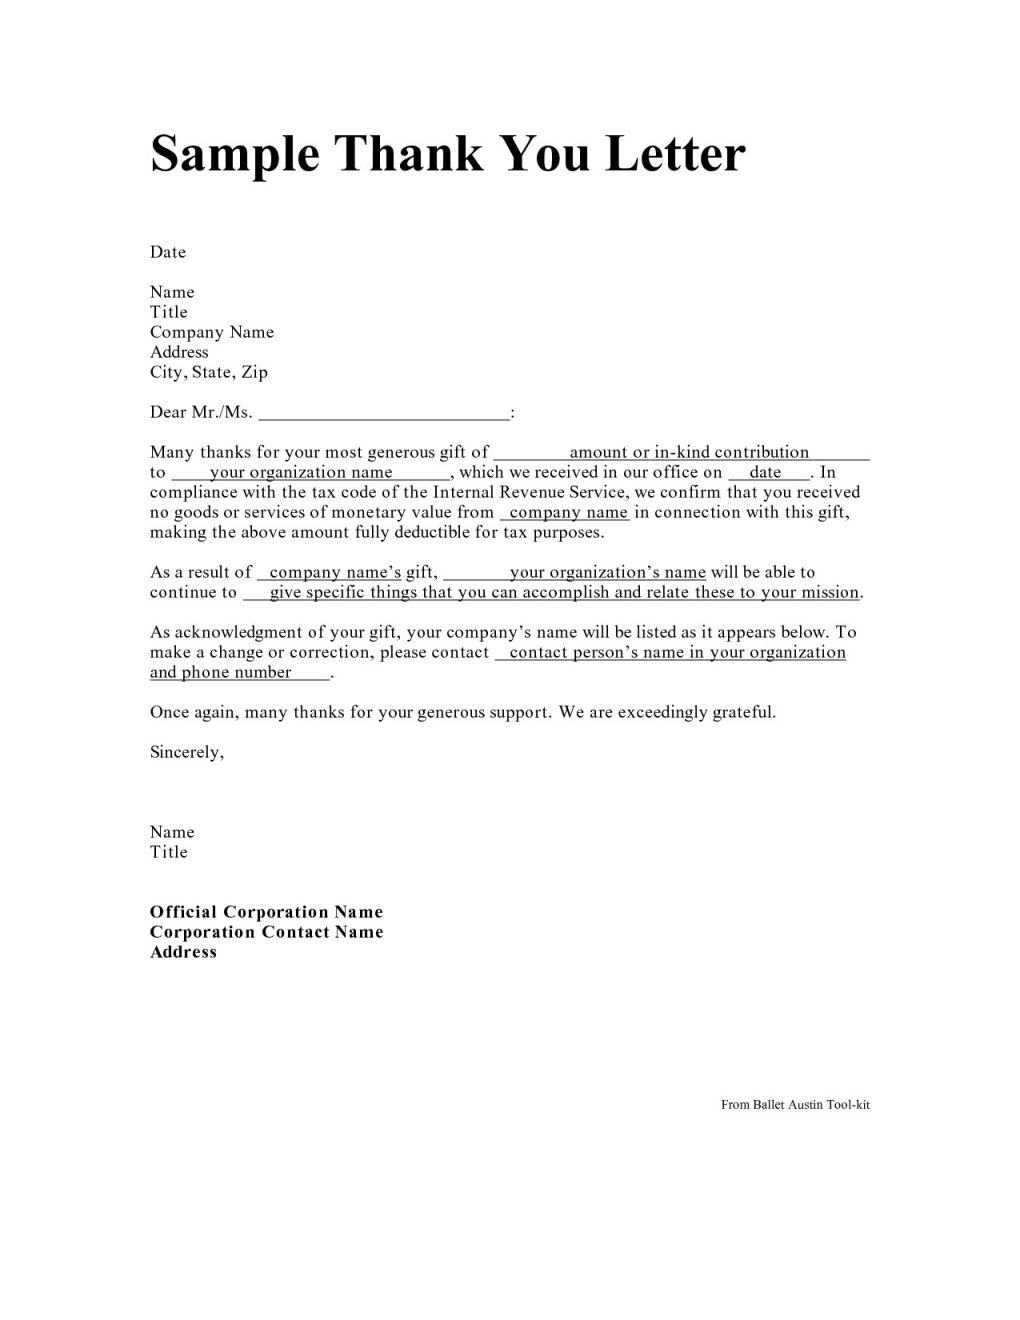 free thank you letter template Collection-Relatively Free Reume Templates Elegant Free Templates Best Ivoice Template 0d Will Sample Format ux9 19-m